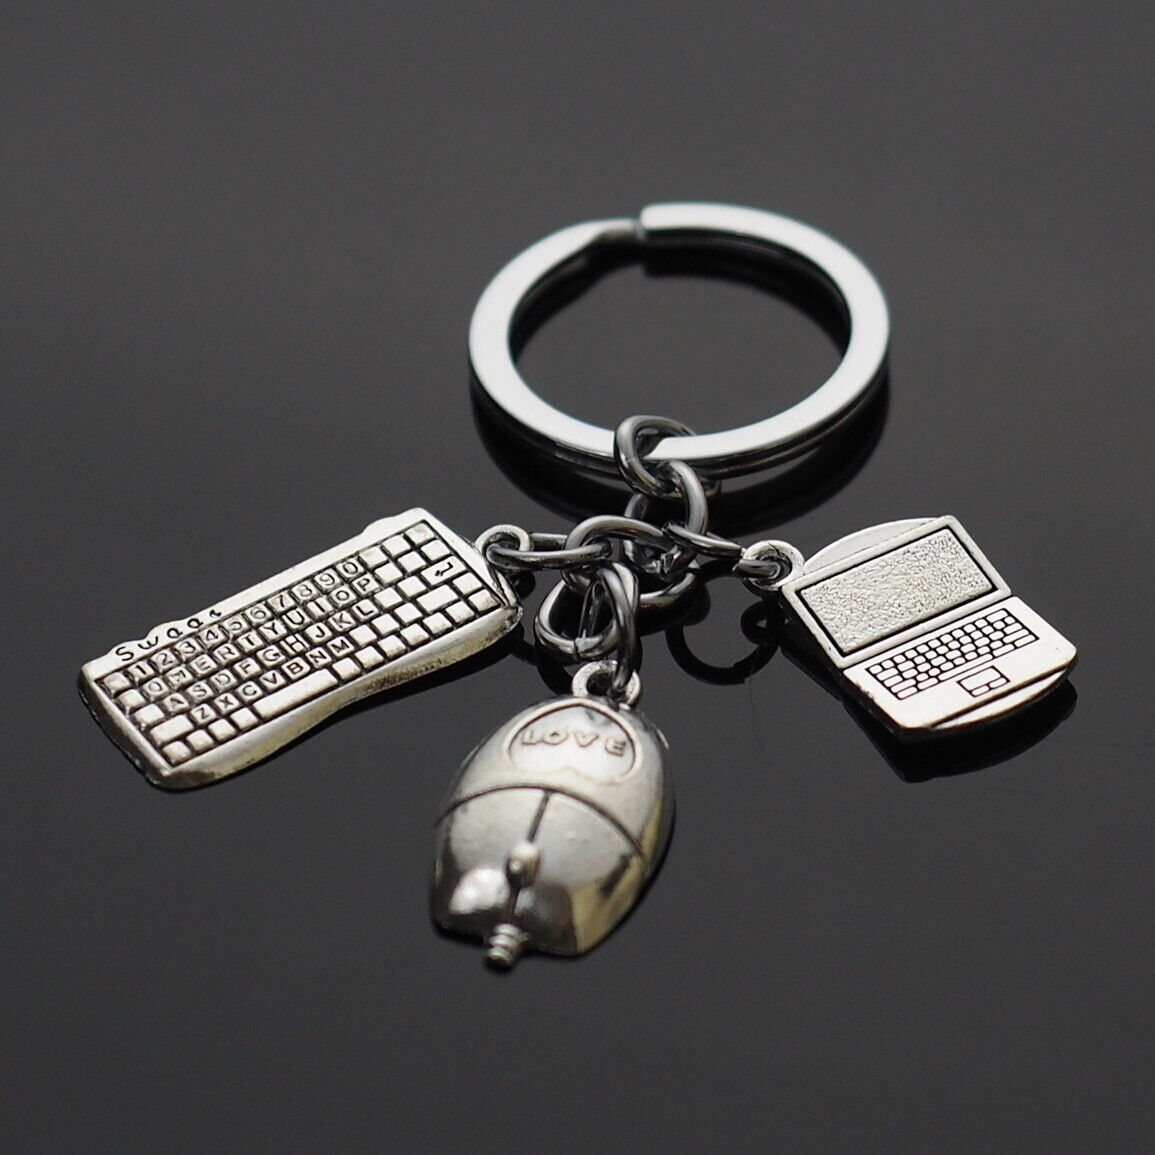 Computer Internet Laptop Mouse Keyboard Charms Silver Pendants Keychain Gift 